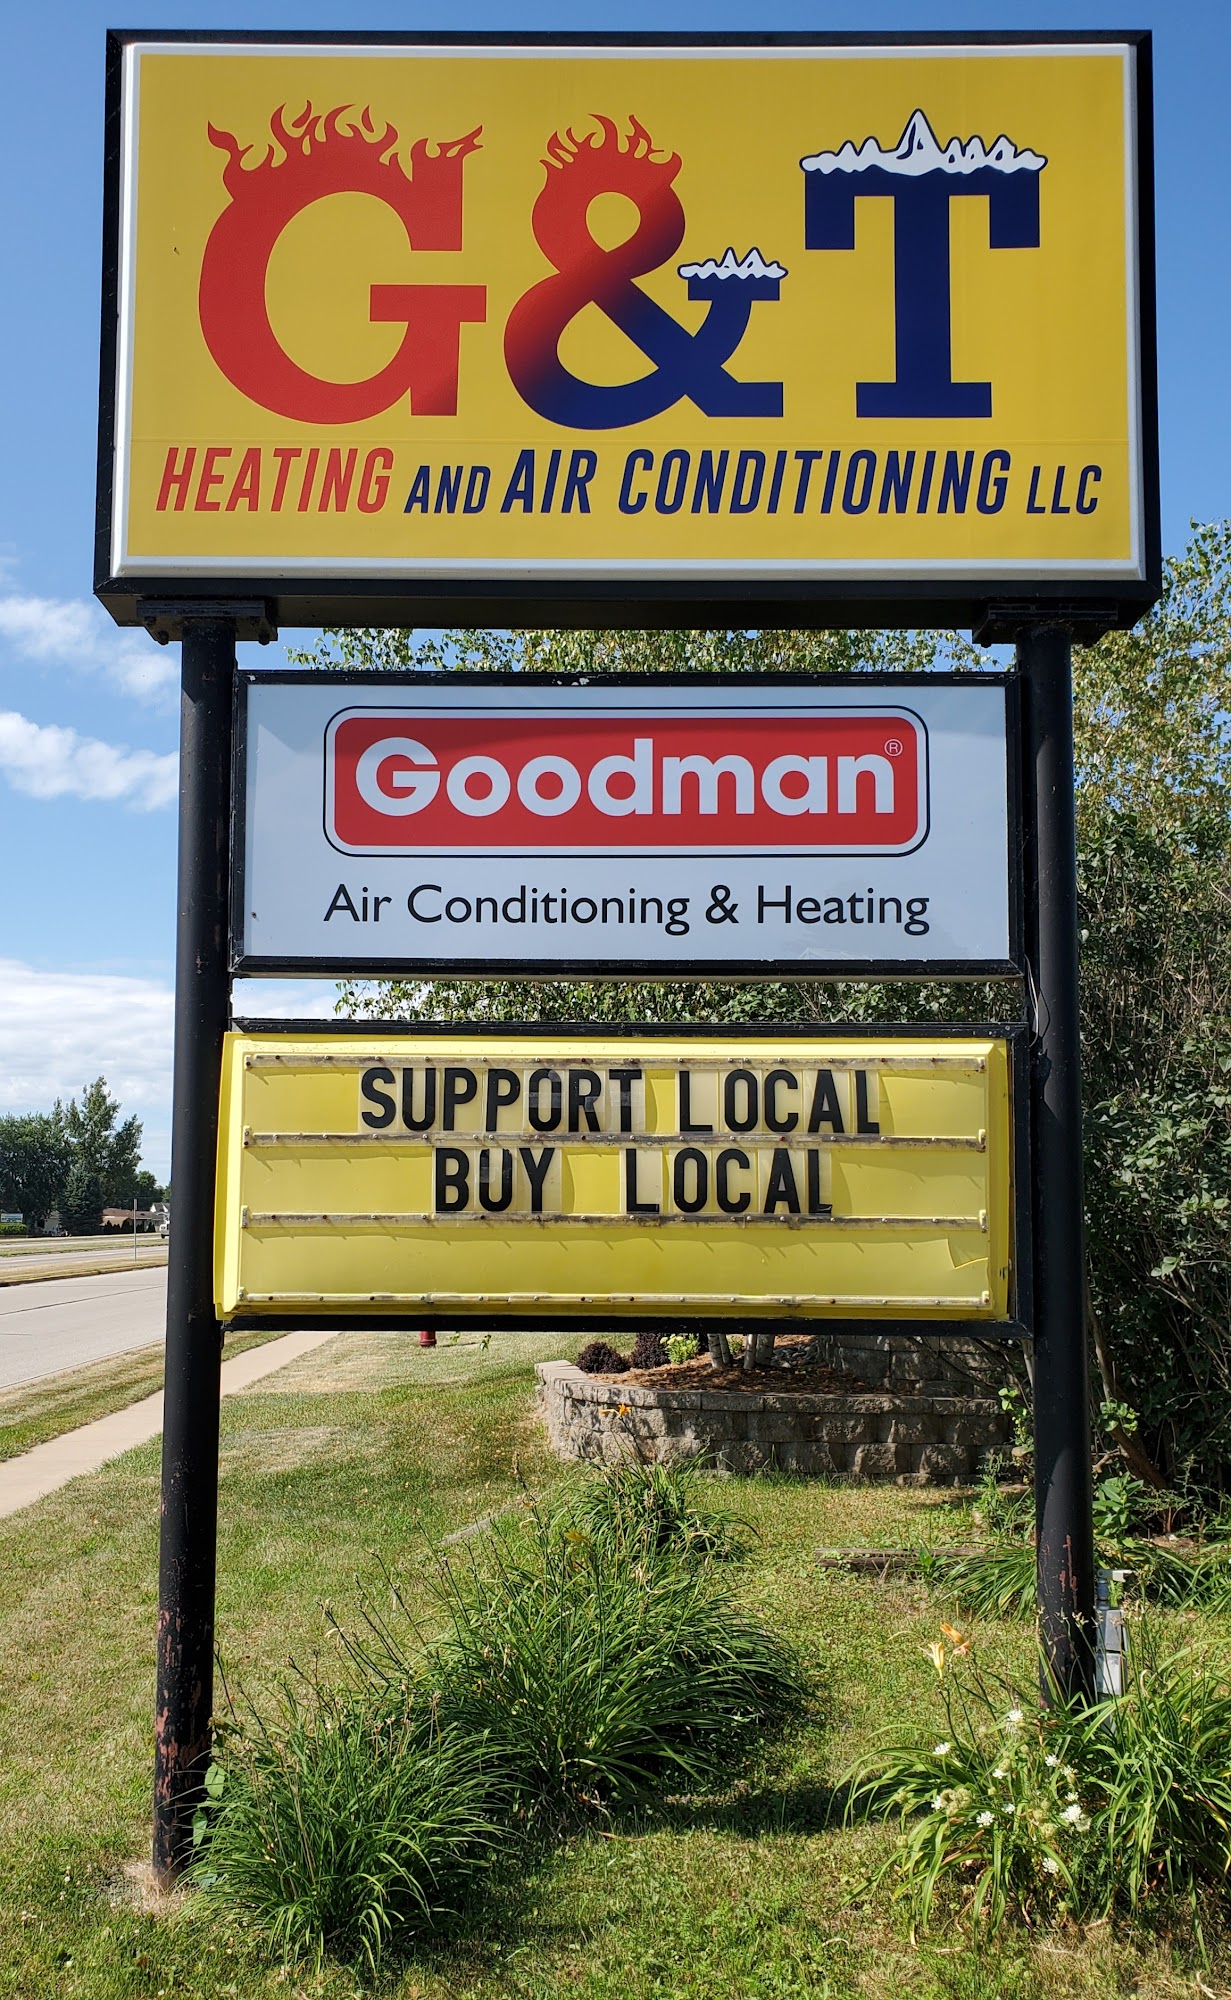 G&T Heating and Air Conditioning, LLC and formally A/C Doc's West Salem Appliance